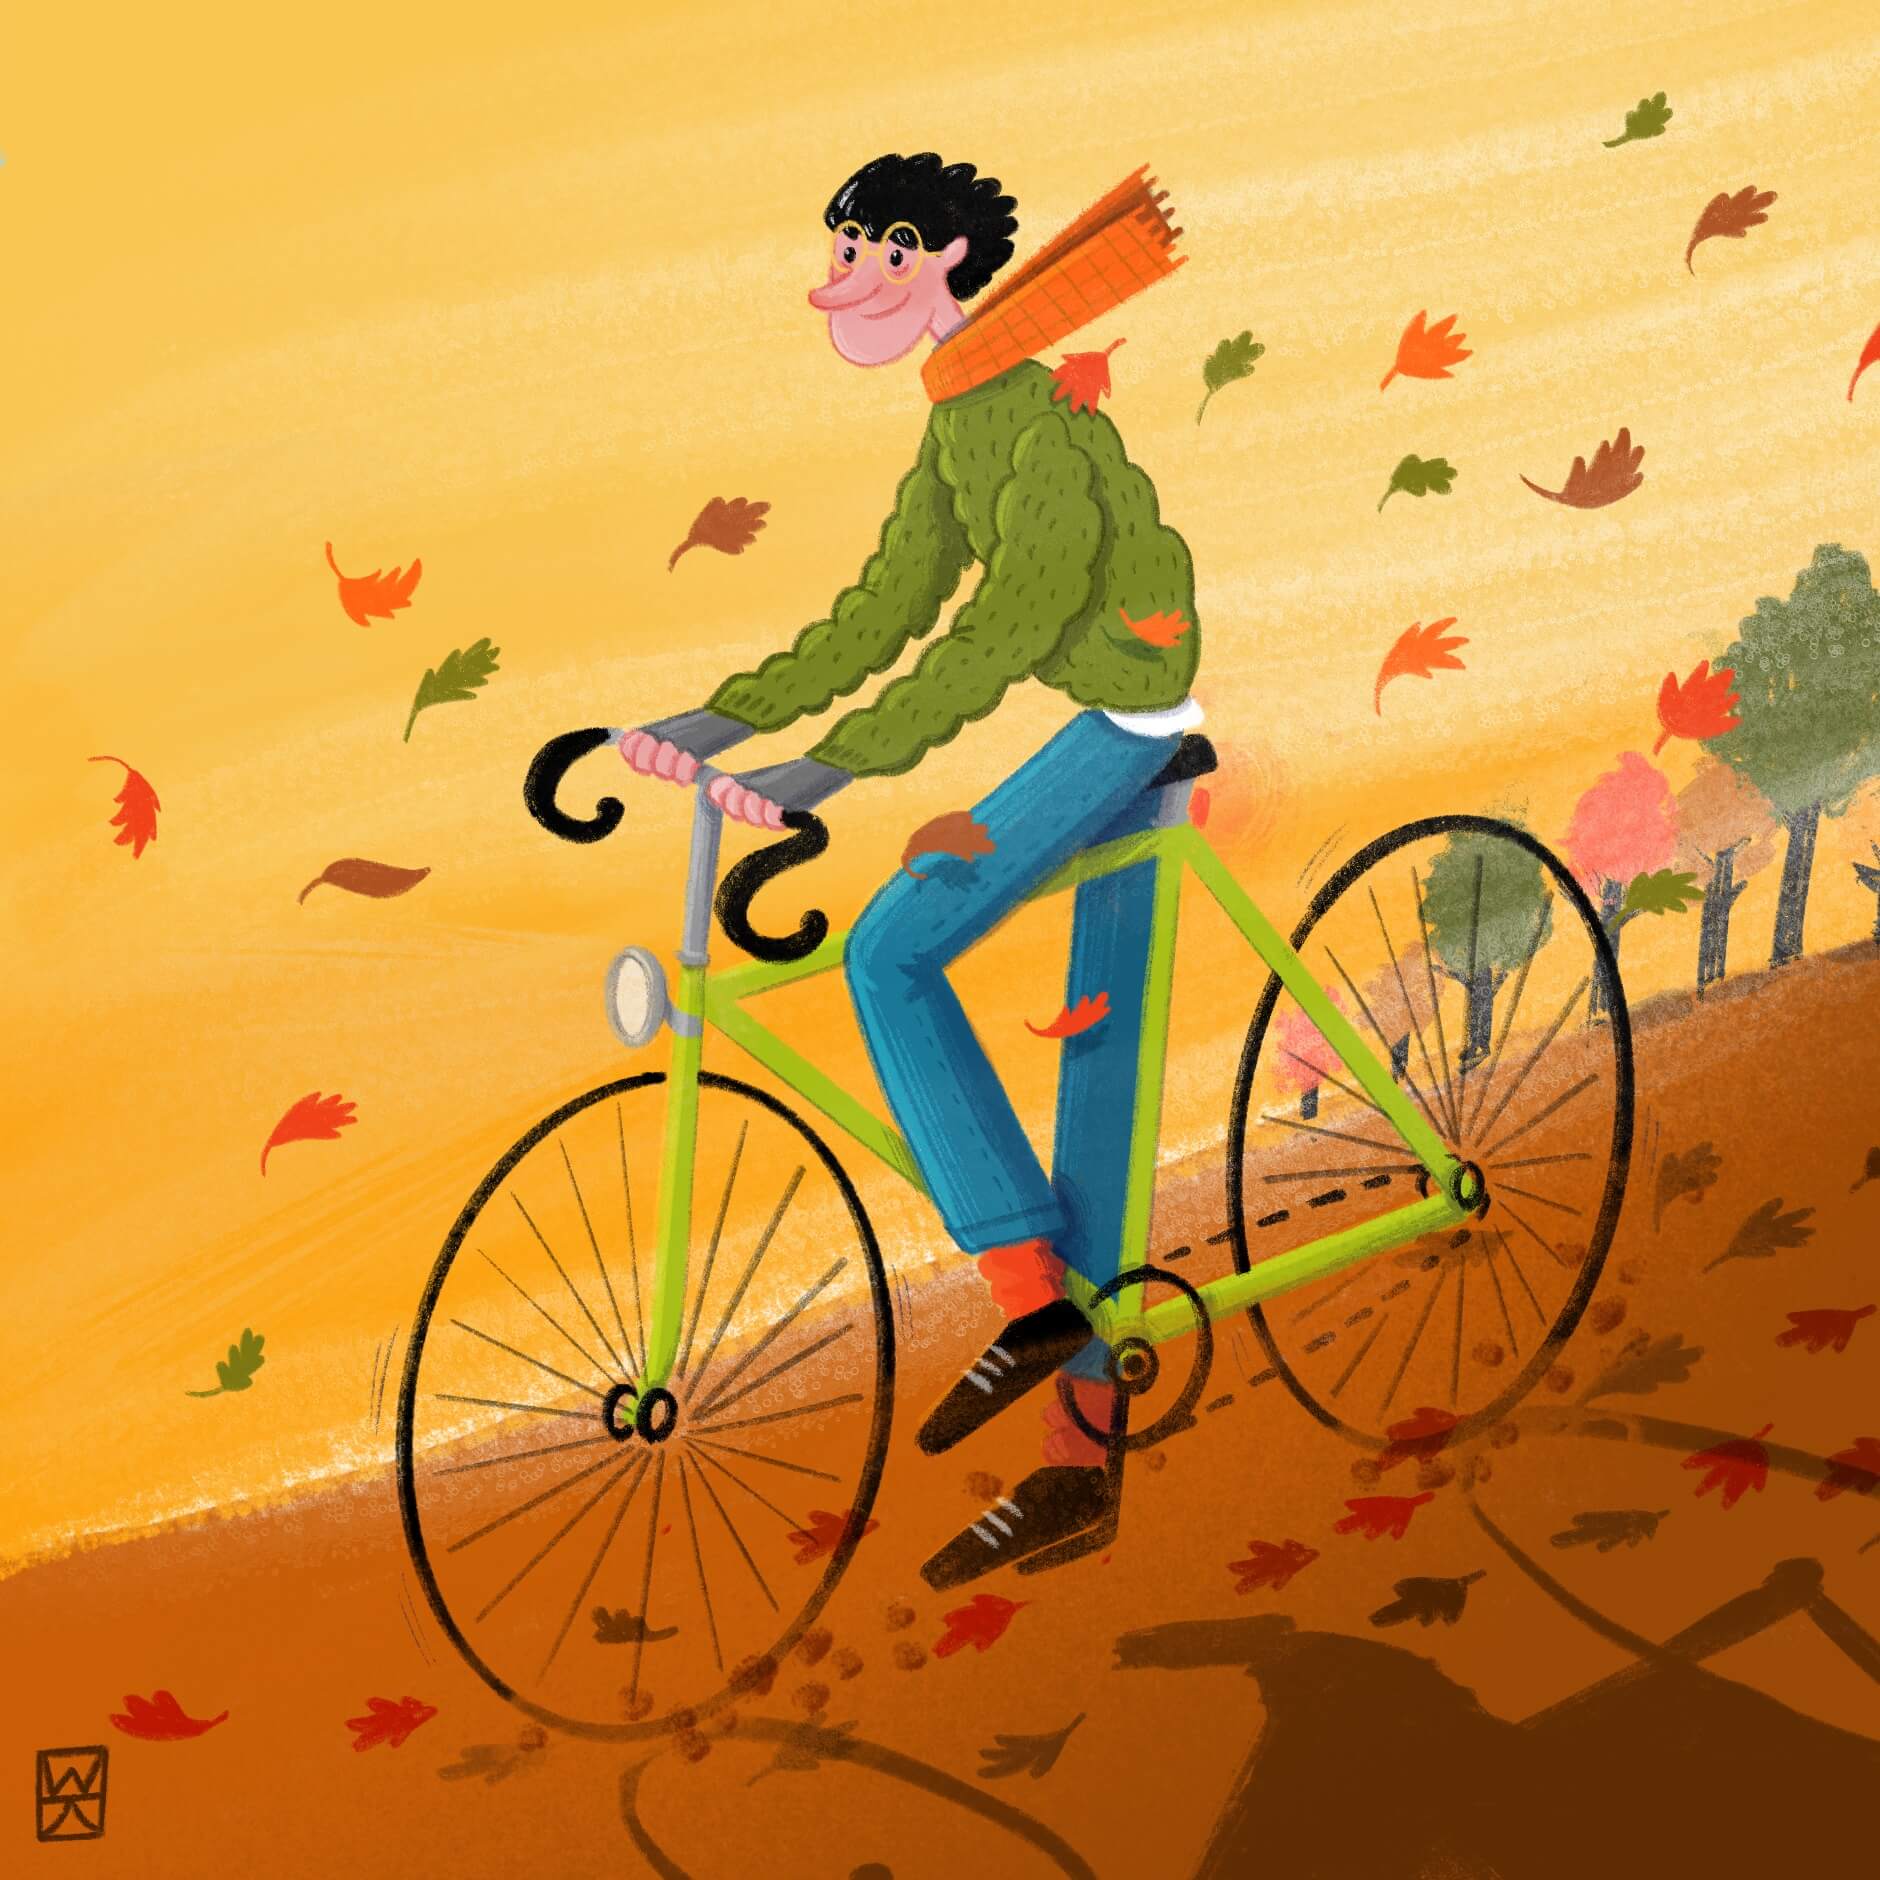 Boy rides a bicycle through colored leaves